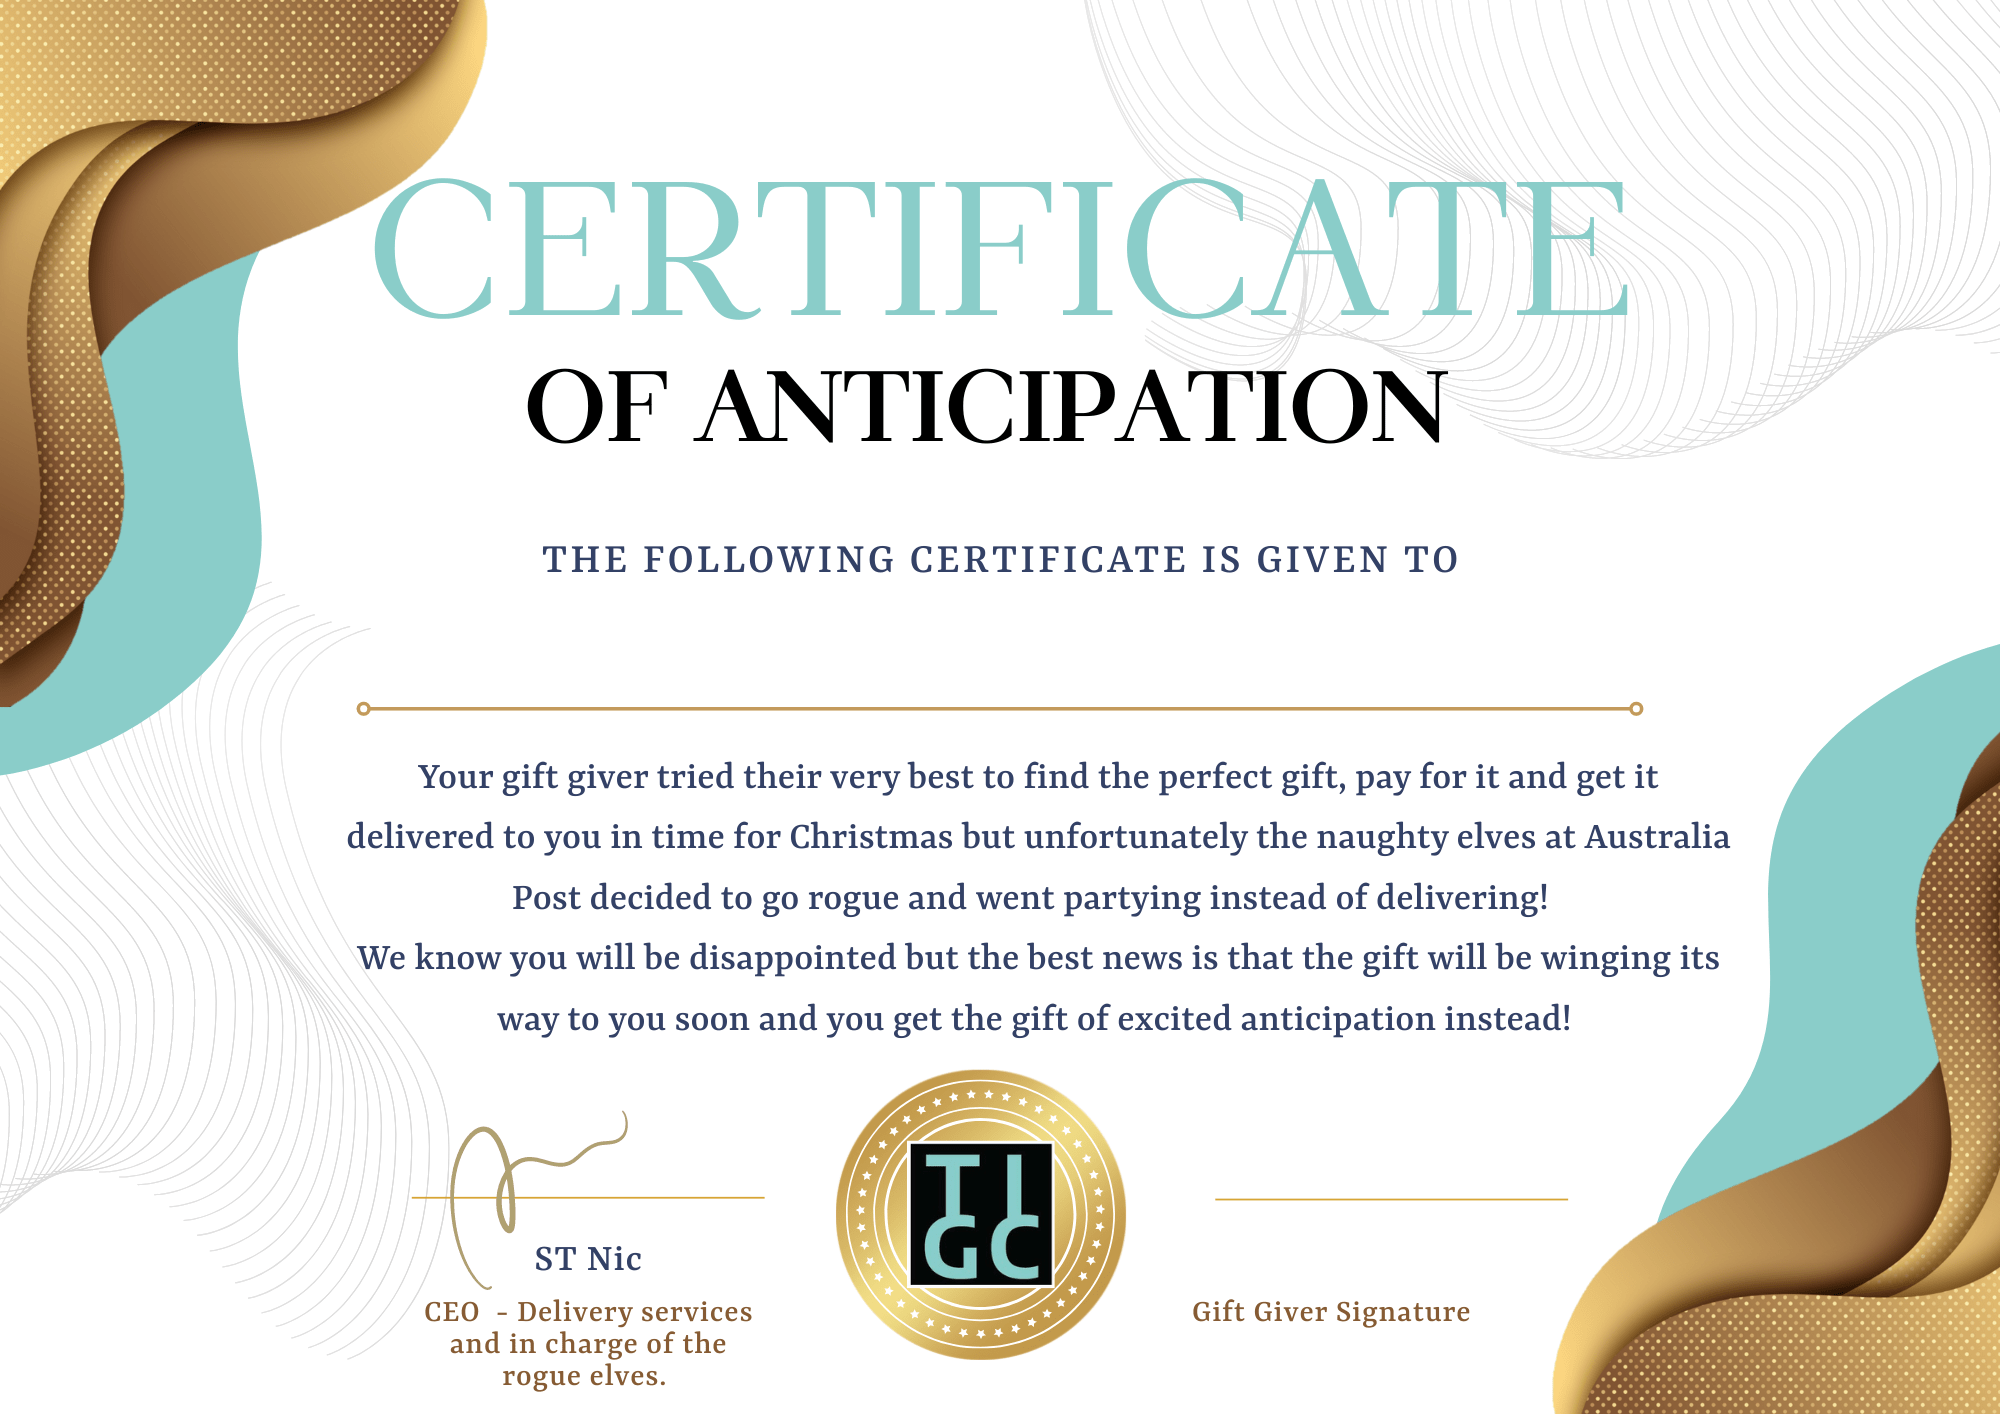 TIGC The Inappropriate Gift Co Certificate of Anticipation